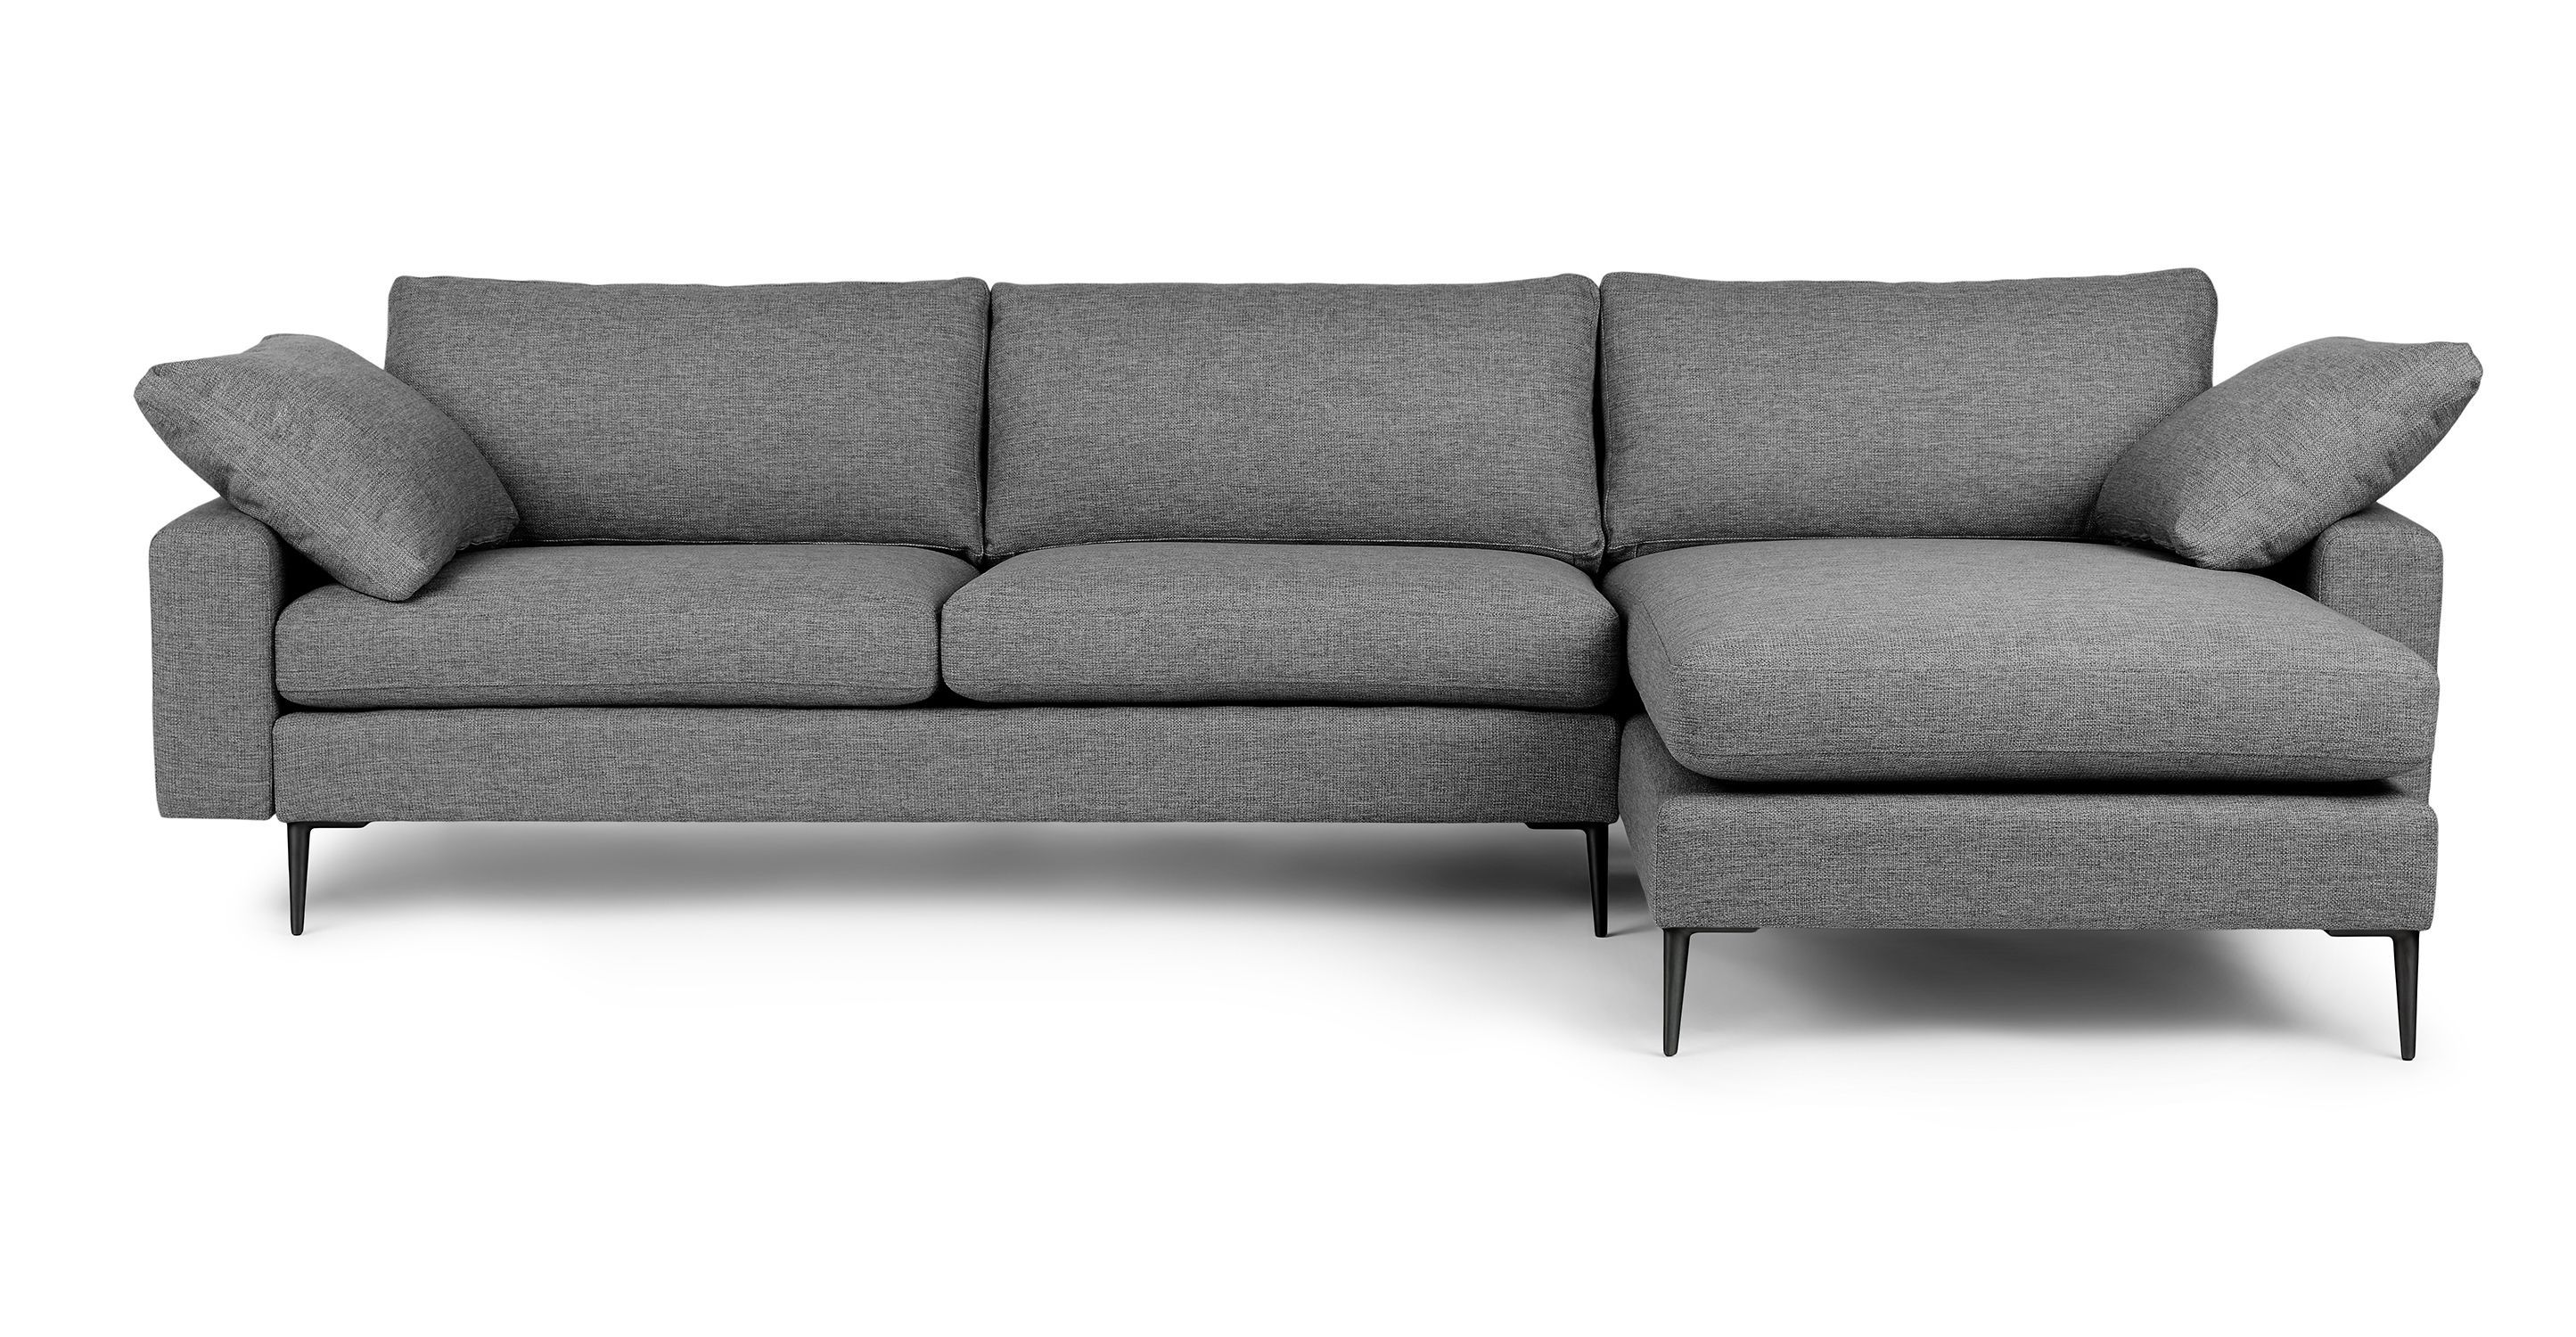 Gravel Gray Reversible Fabric Sectional | Nova | Article Within Reversible Sectional Sofas (View 3 of 20)